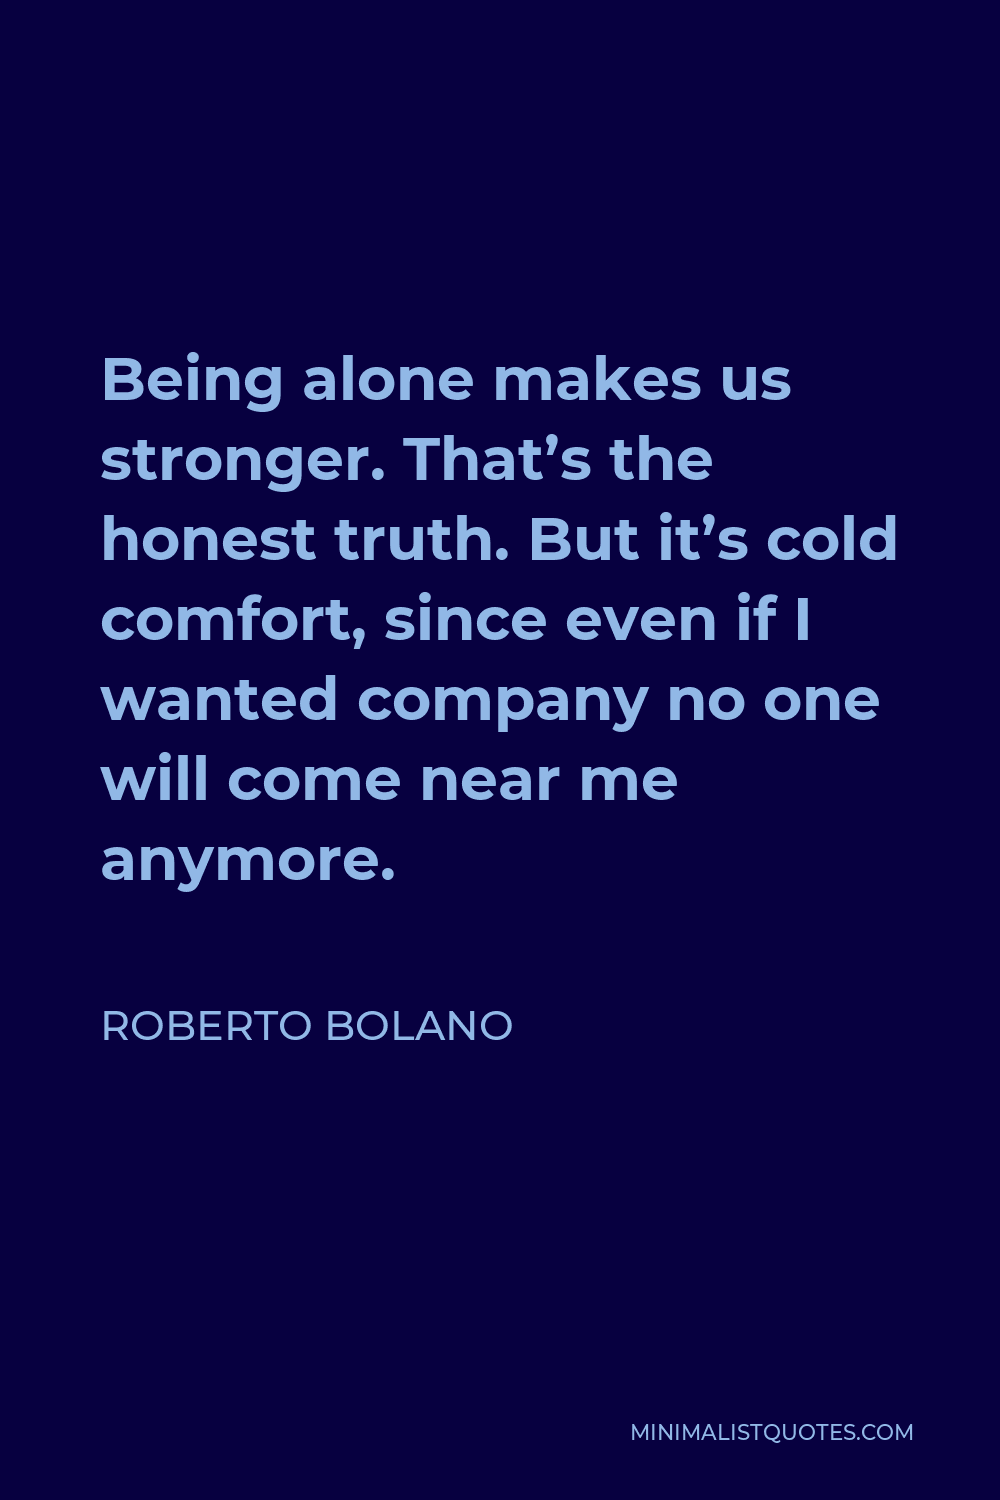 Roberto Bolano Quote - Being alone makes us stronger. That’s the honest truth. But it’s cold comfort, since even if I wanted company no one will come near me anymore.